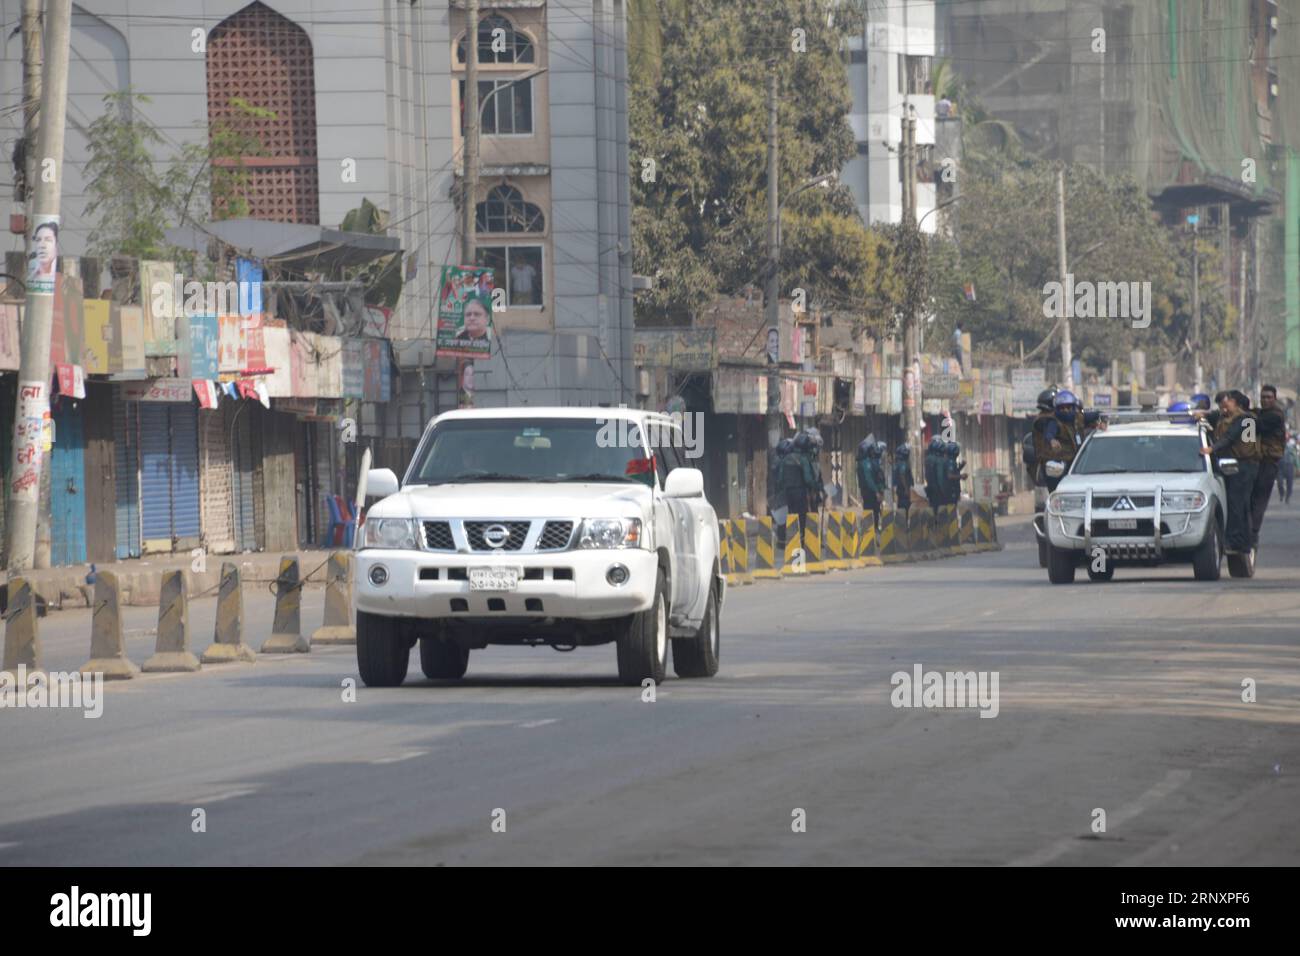 (180209) -- DHAKA, Feb. 9, 2018 -- A vehicle carrying former Bangladeshi Prime Minister Khaleda Zia arrrives at the court in Dhaka, Bangladesh, on Feb. 8, 2018. Former Bangladeshi Prime Minister Khaleda Zia has been found guilty of a graft charge and sentenced to five years in prison. ) (zf) BANGLADESH-DHAKA-EX-PM-SENTENCE Naim-Ul-Karim PUBLICATIONxNOTxINxCHN Stock Photo